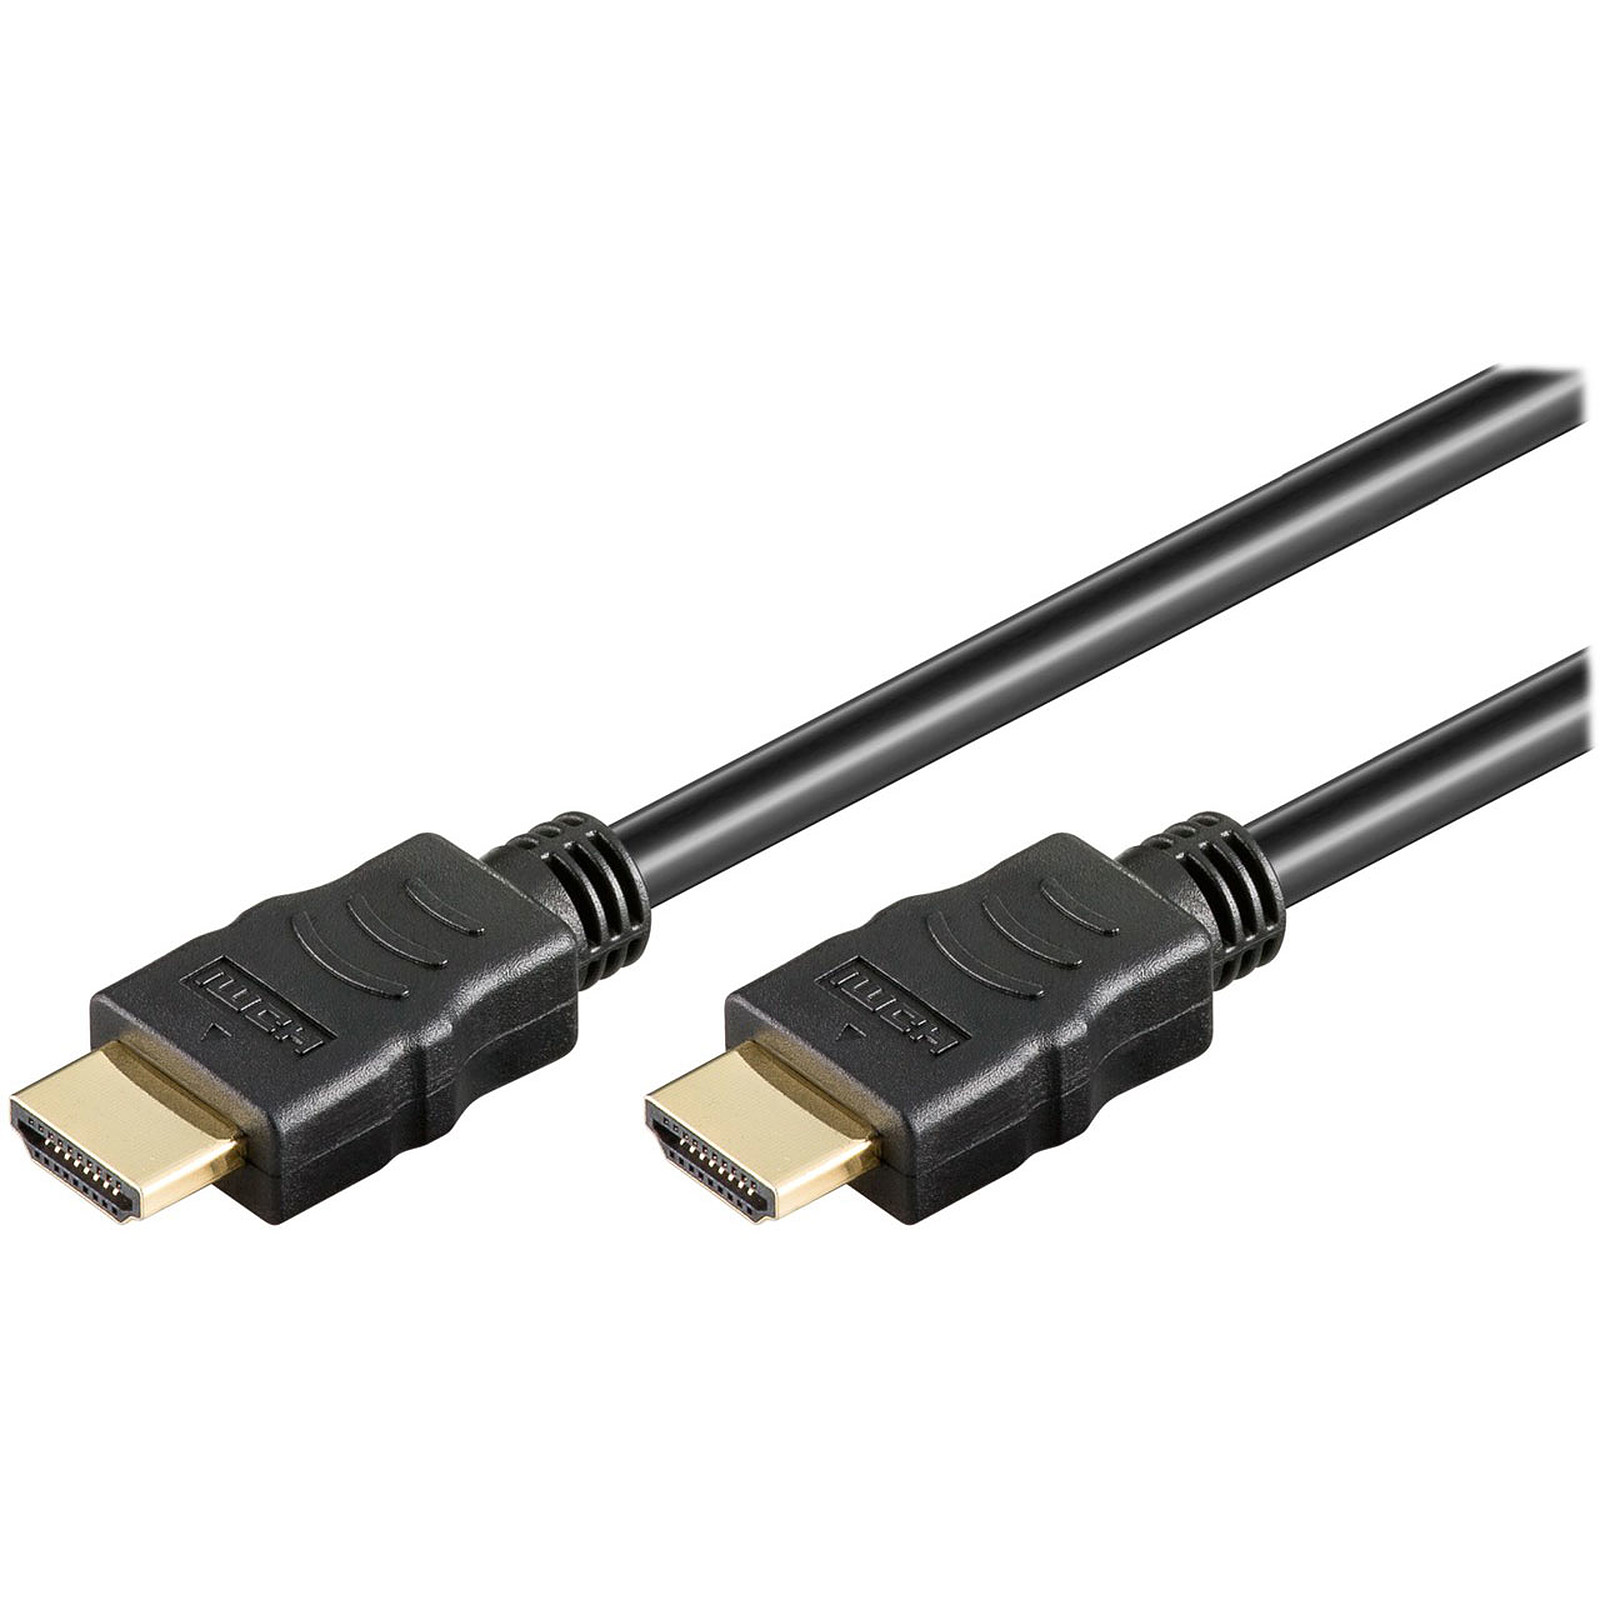 Goobay High Speed HDMI Cable with Ethernet (1 m) - HDMI Goobay